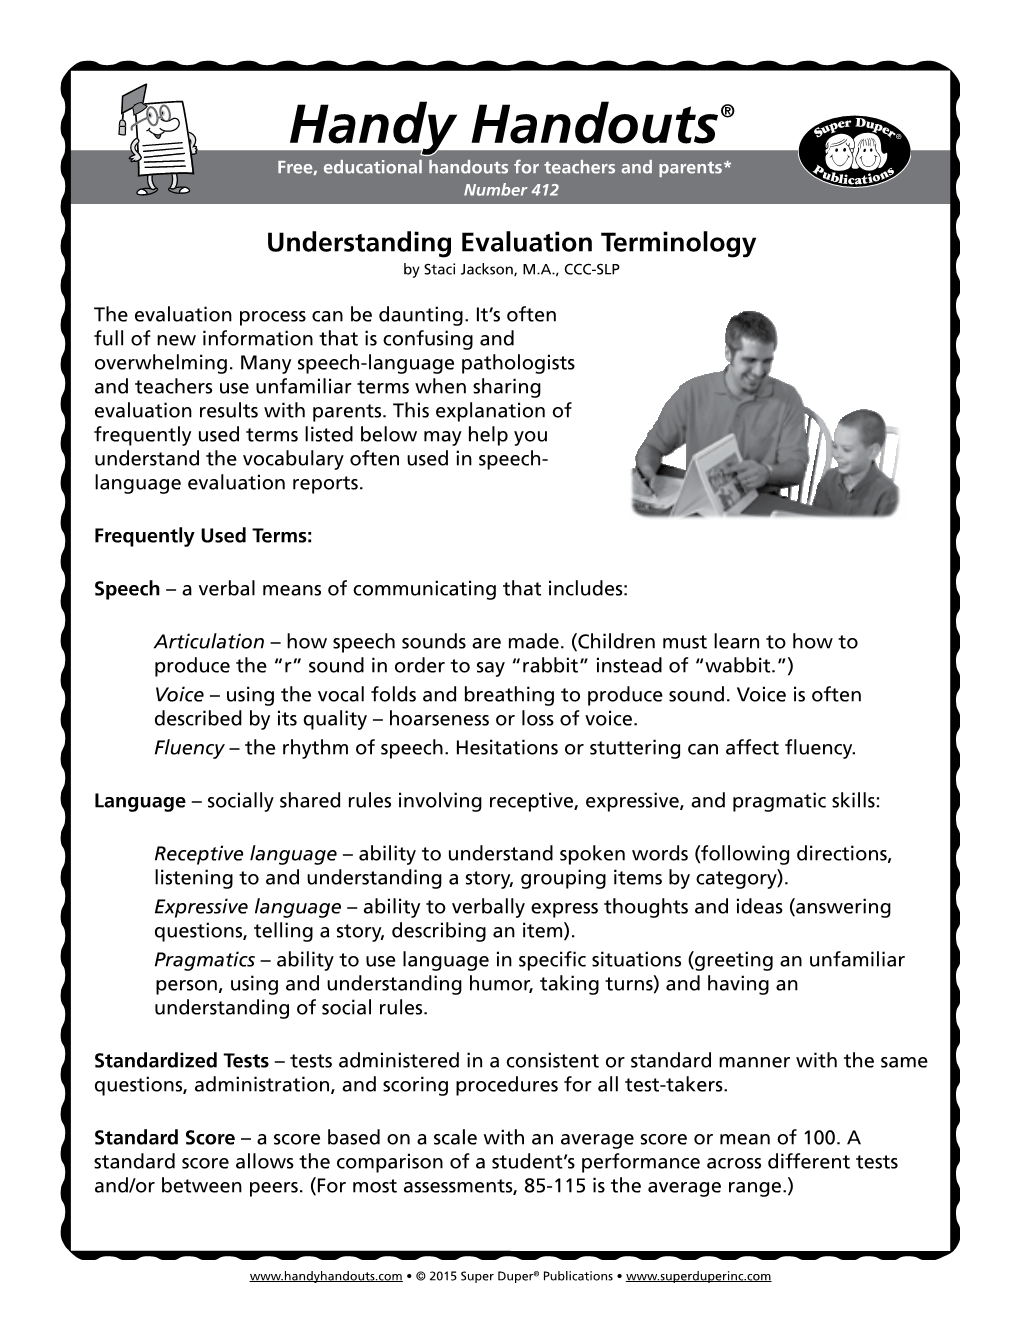 Handy Handouts® Free, Educational Handouts for Teachers and Parents* Number 412